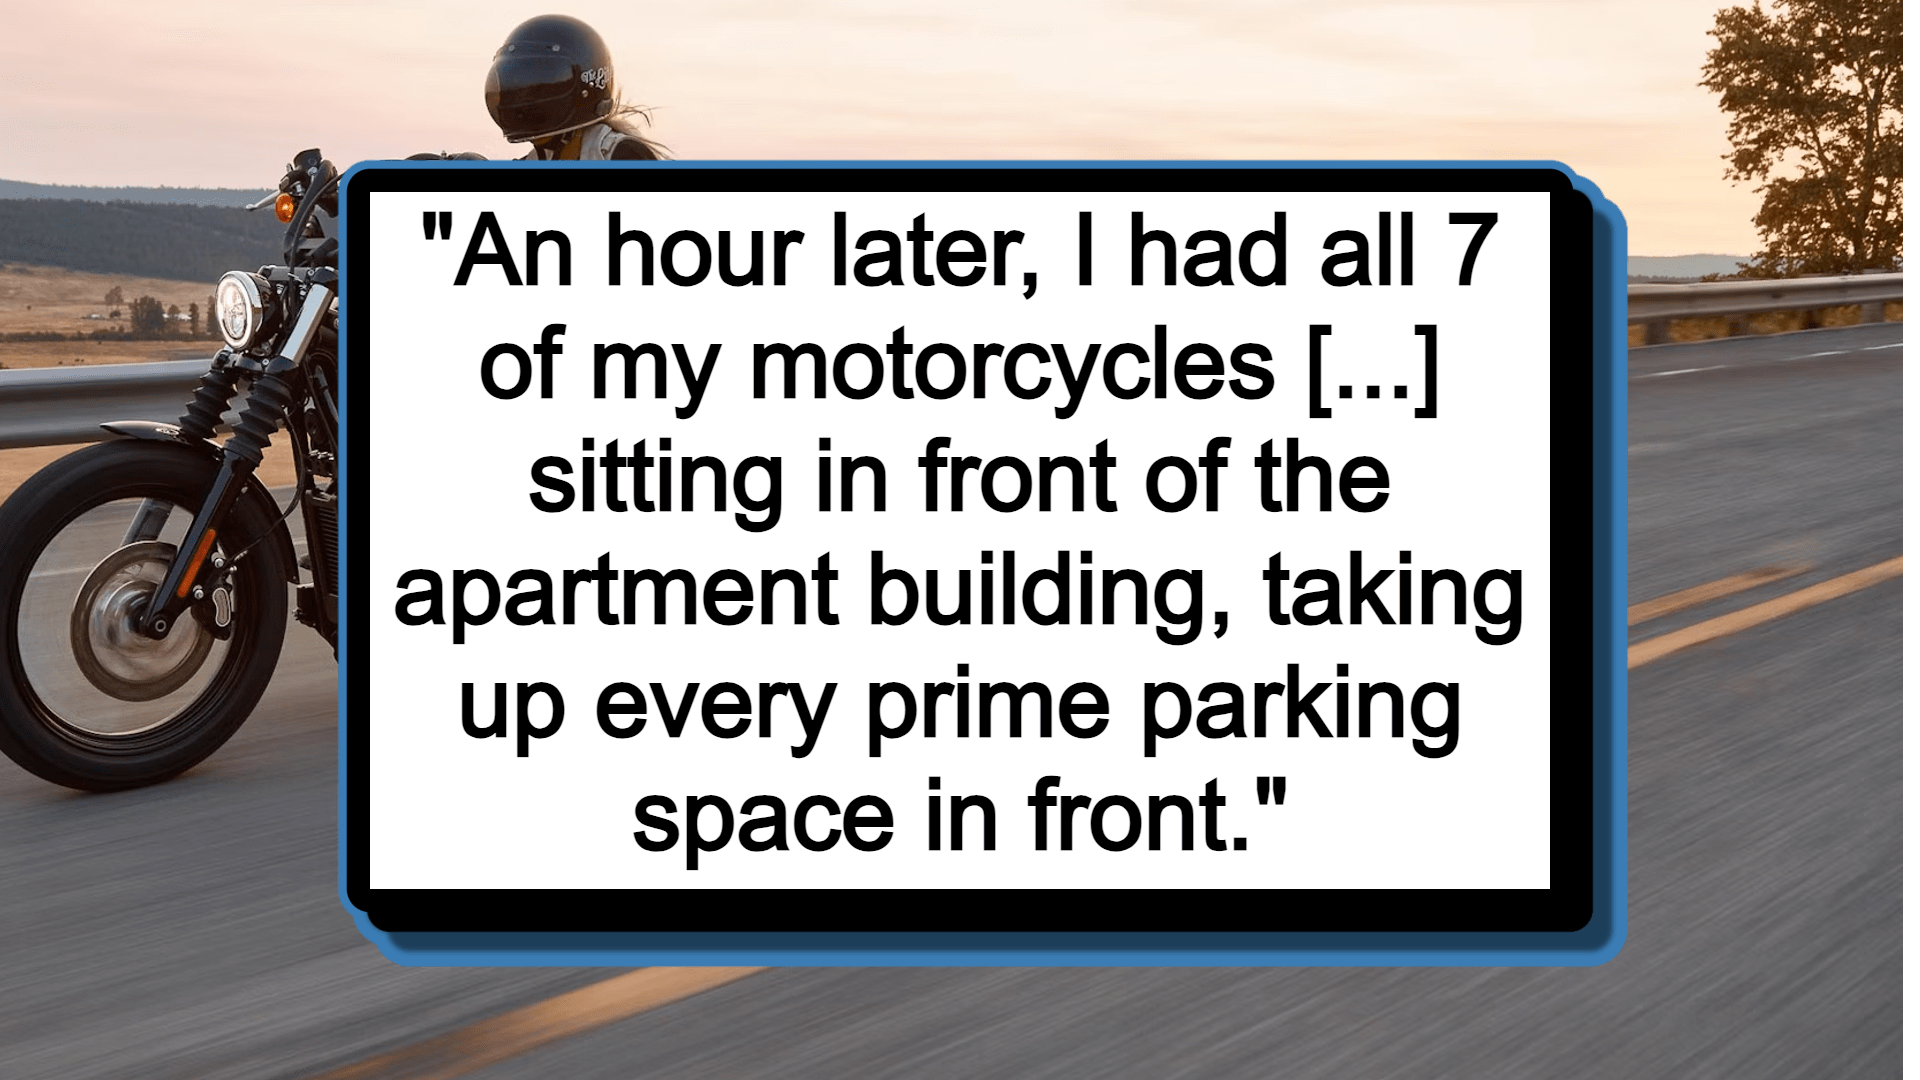 Karen neighbor accuses biker of trying to reserve the best spot, malicious compliance ensues: 'Ok, I'll stop parking both my bikes in one spot'